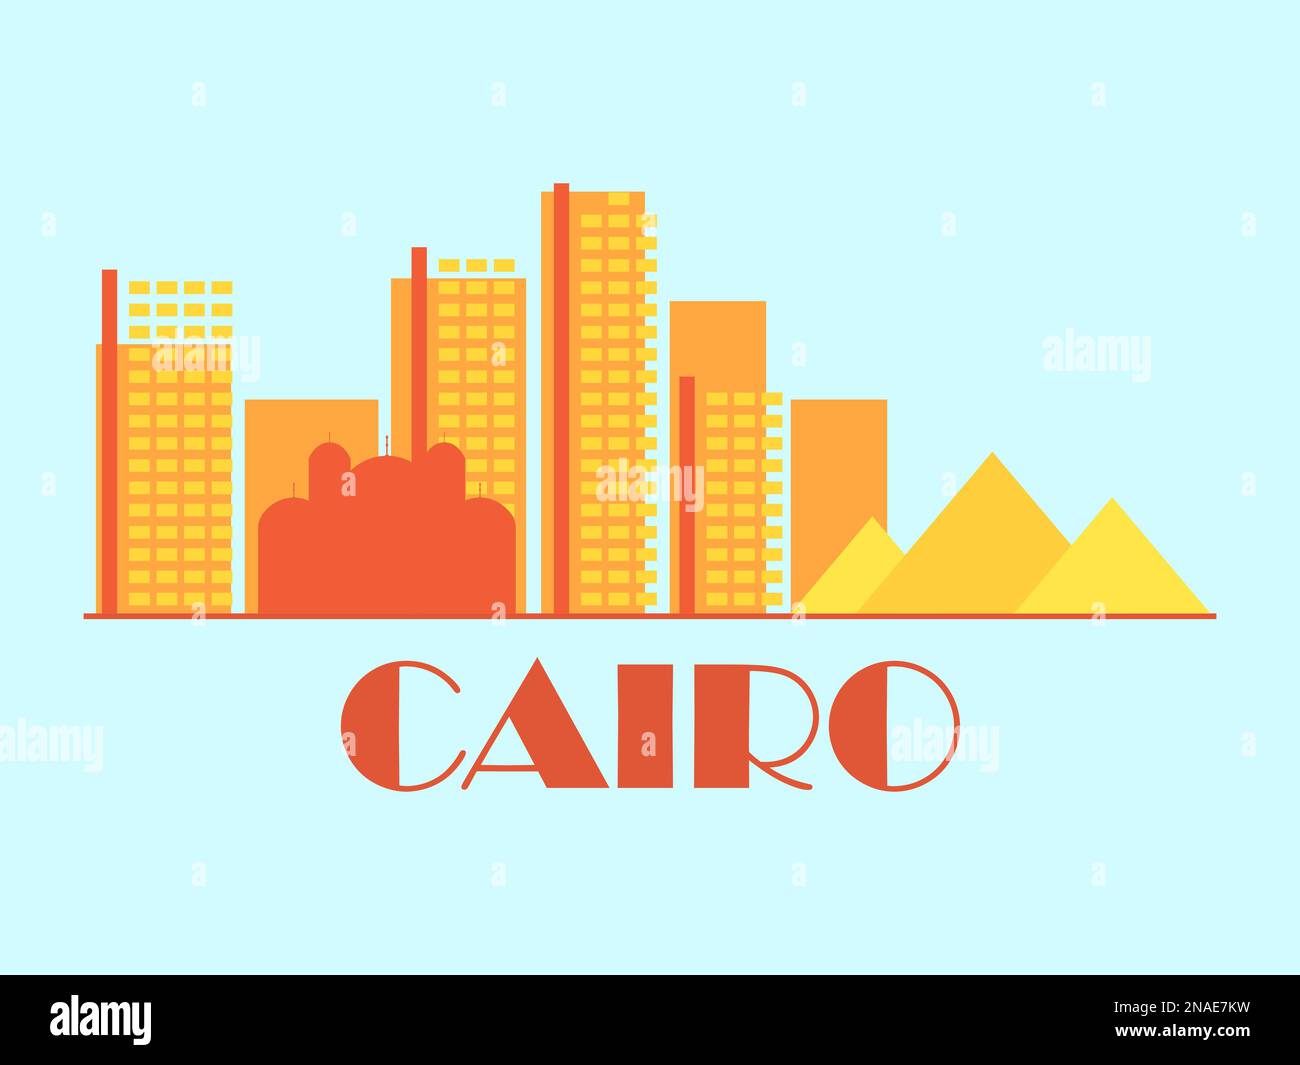 Cairo landscape in vintage style. Retro banner of Cairo with ancient Egyptian pyramids and houses in linear style. Design for print, posters and promo Stock Vector